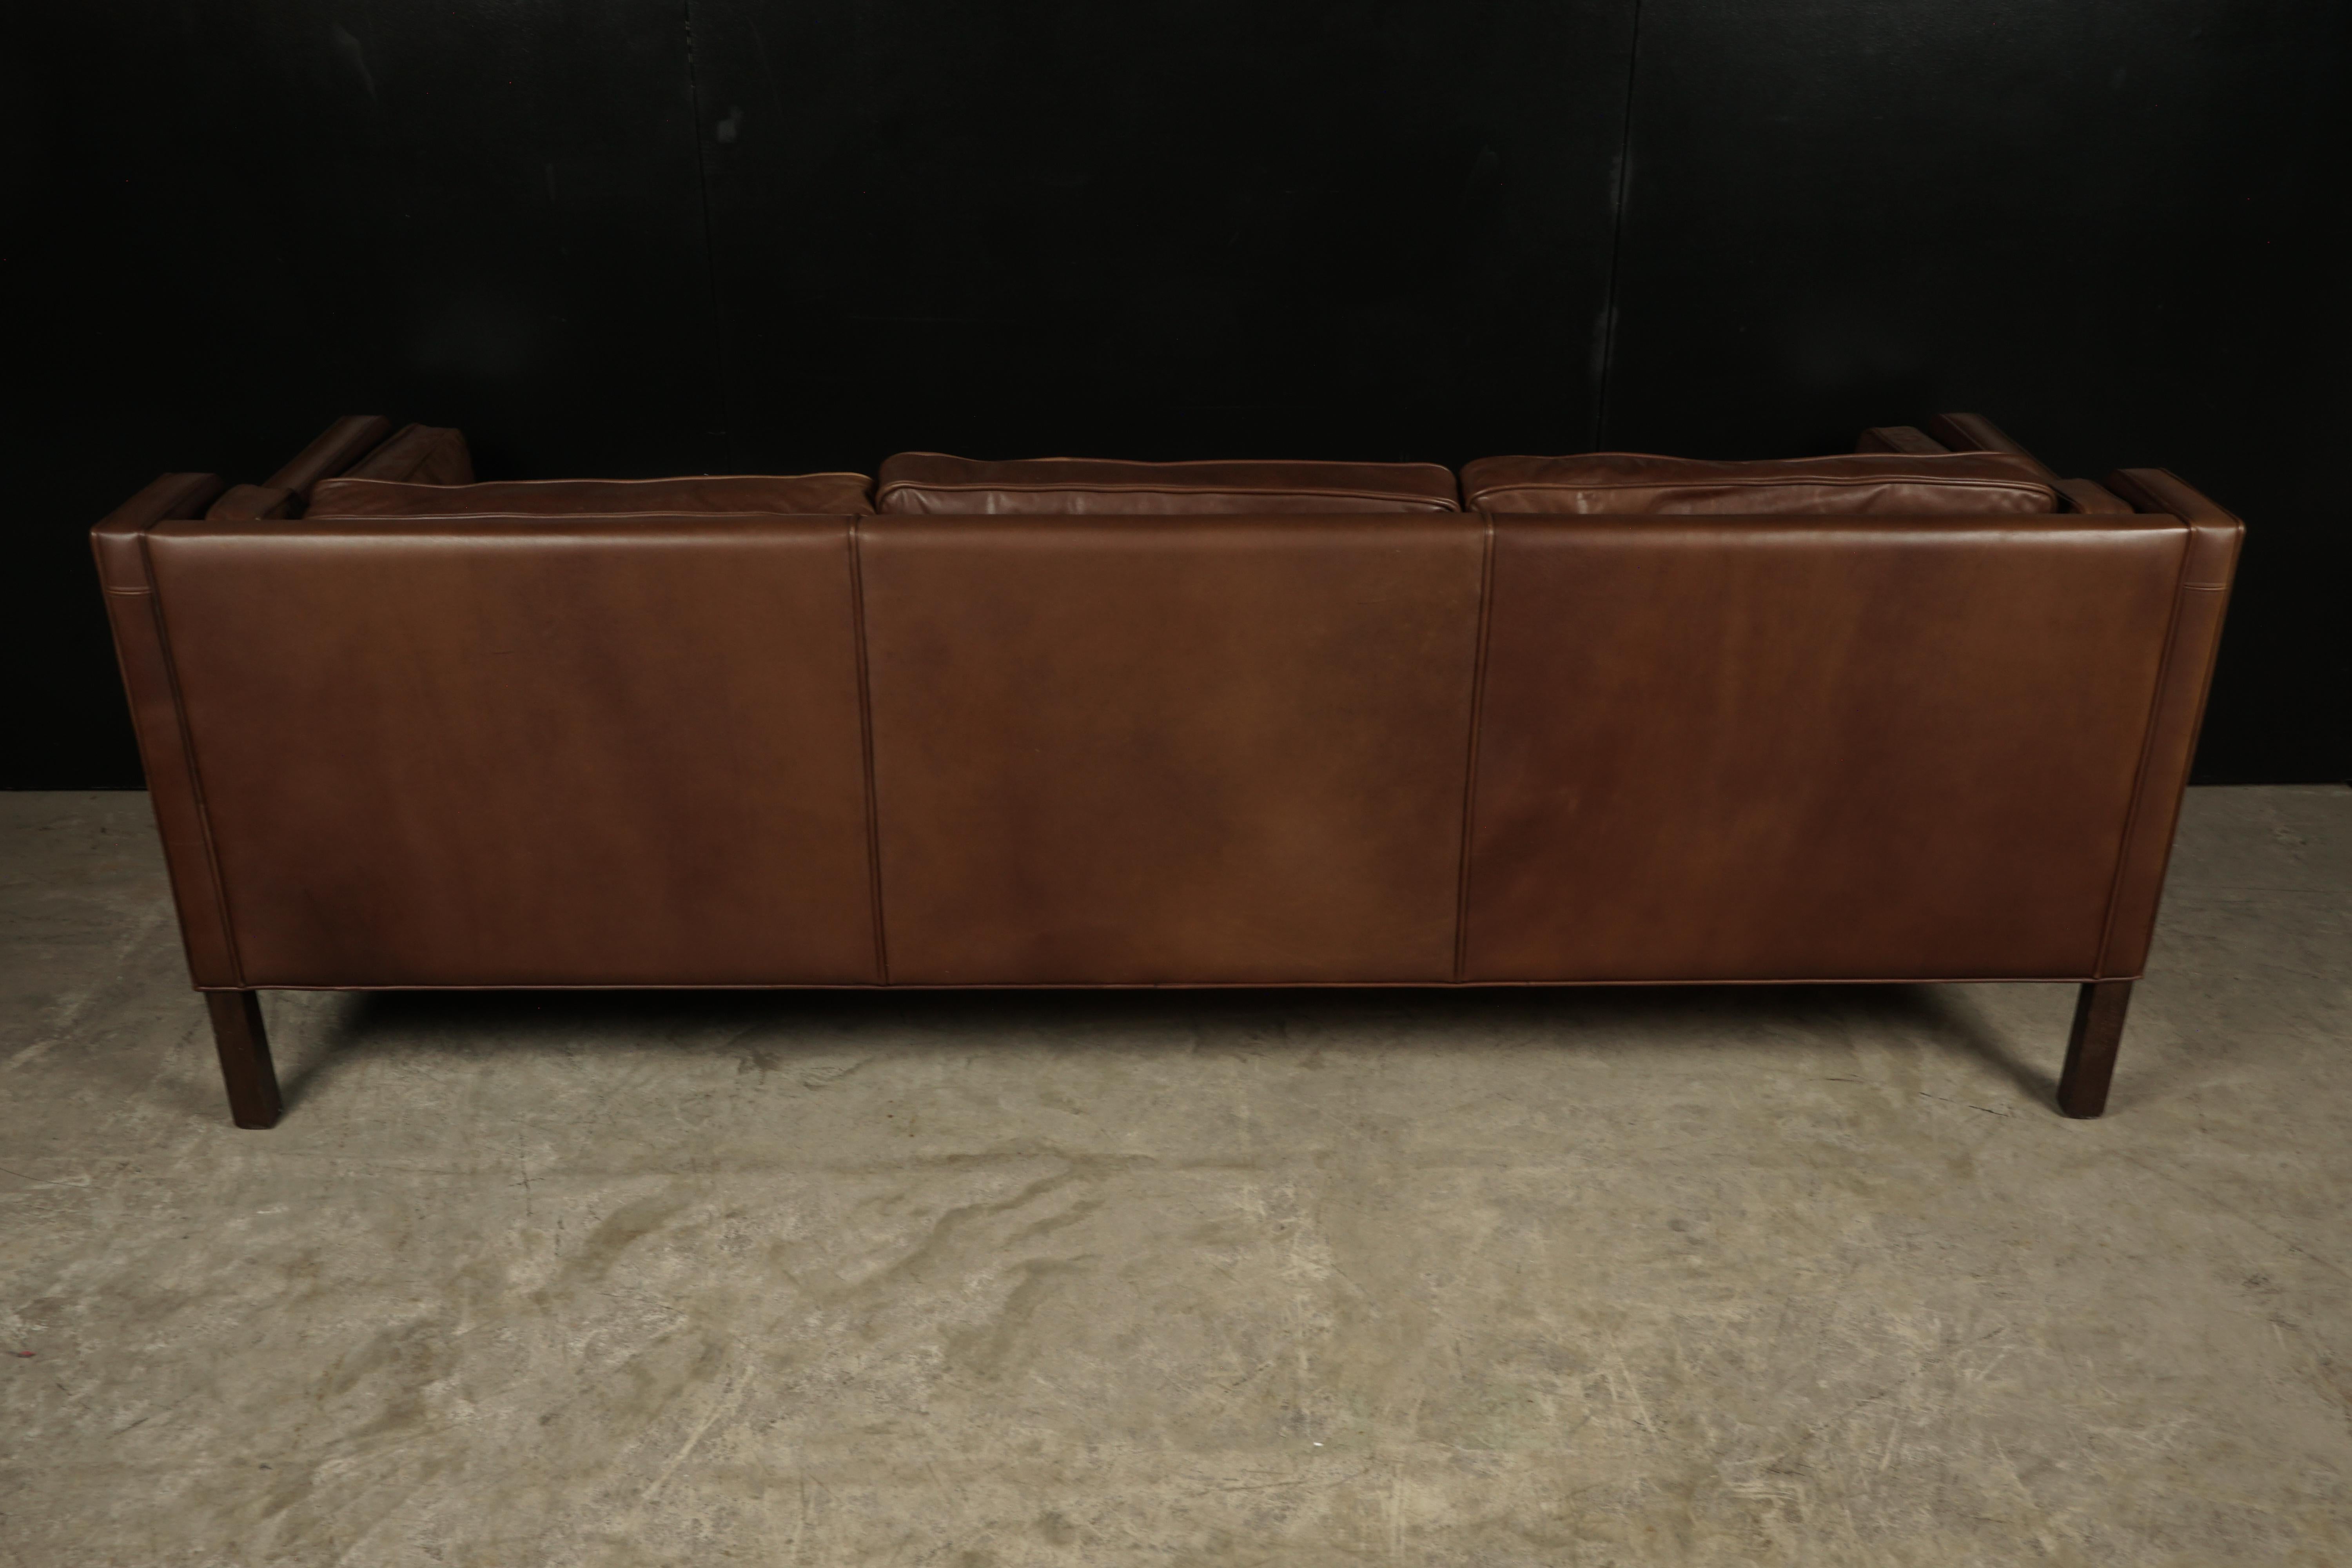 Late 20th Century Midcentury Brown Leather Sofa from Denmark, circa 1970